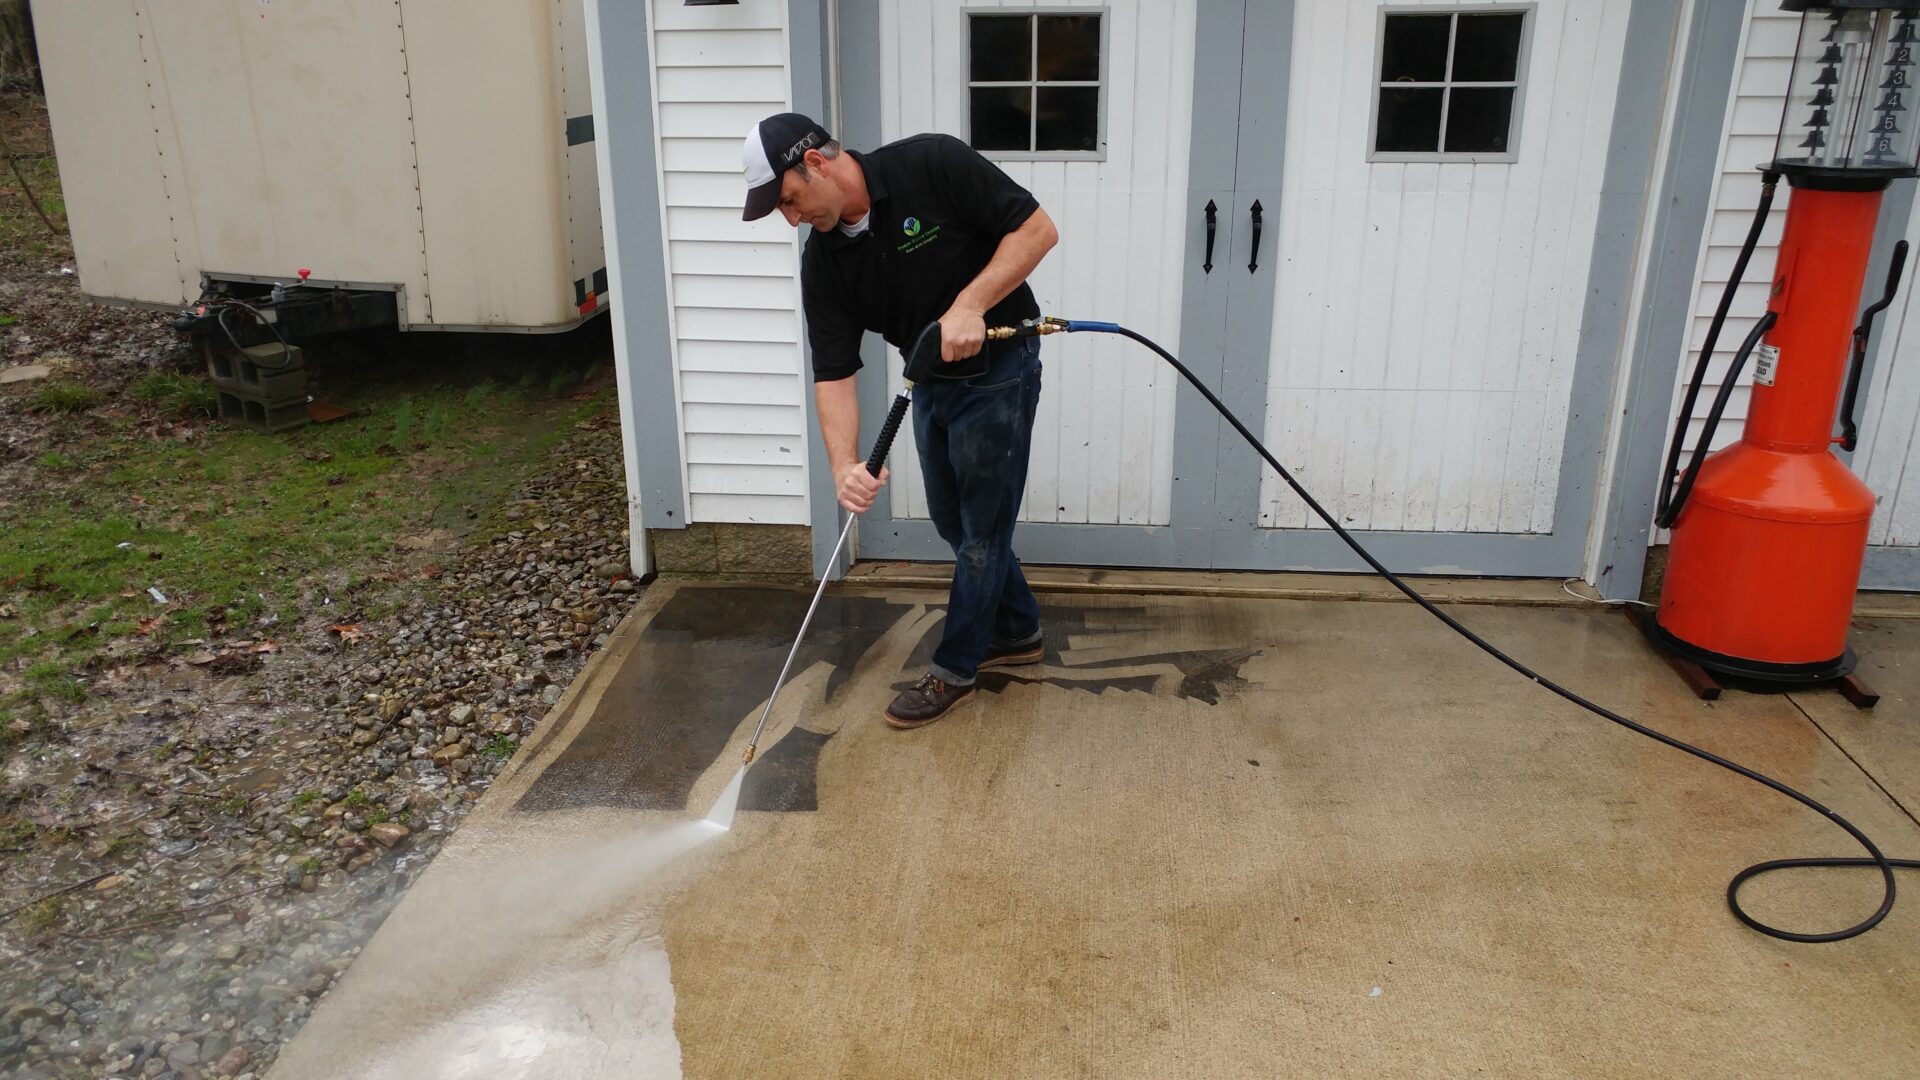 A man is washing his driveway with a hose.